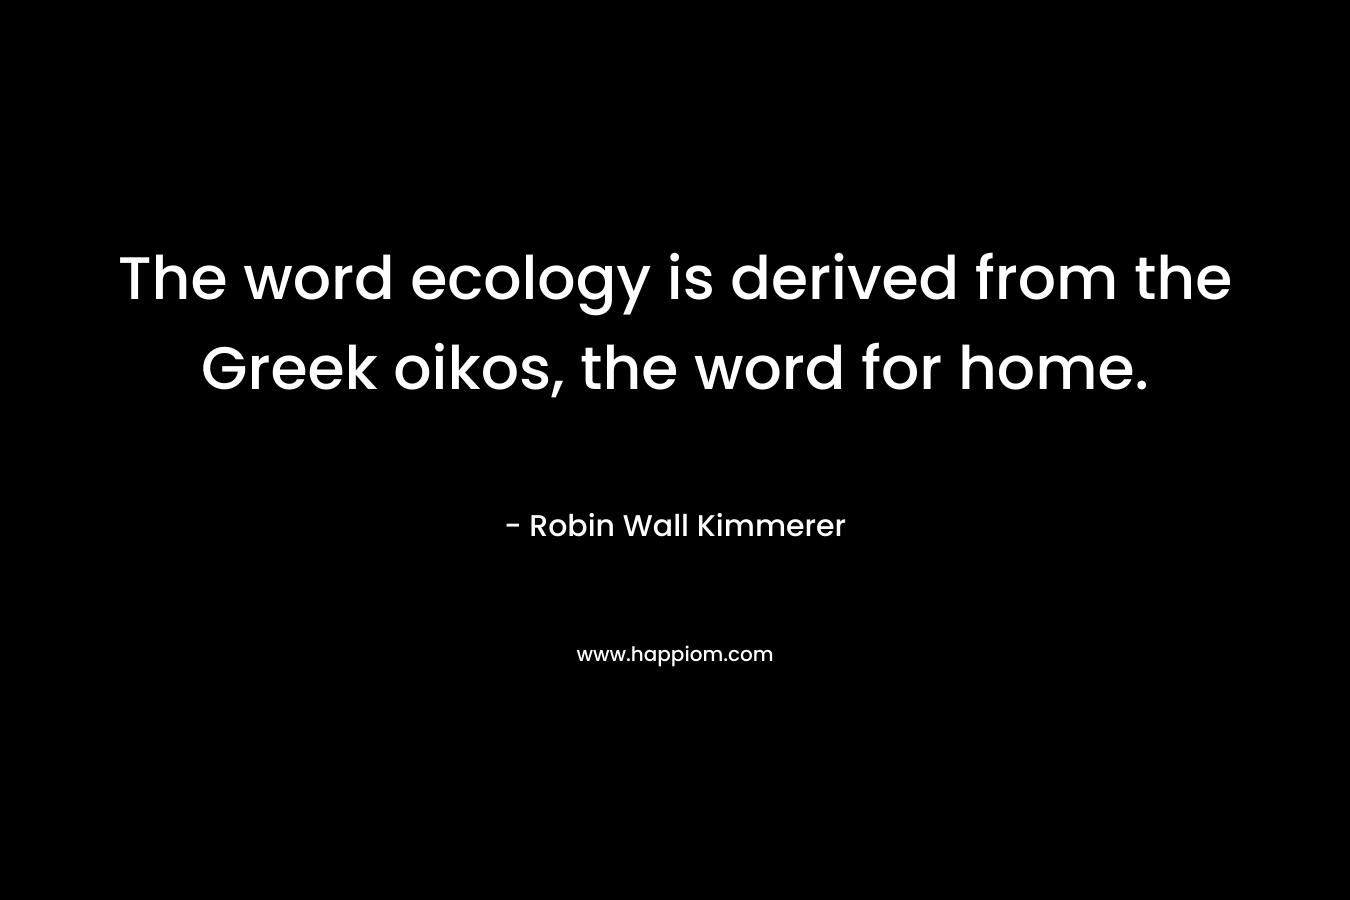 The word ecology is derived from the Greek oikos, the word for home.